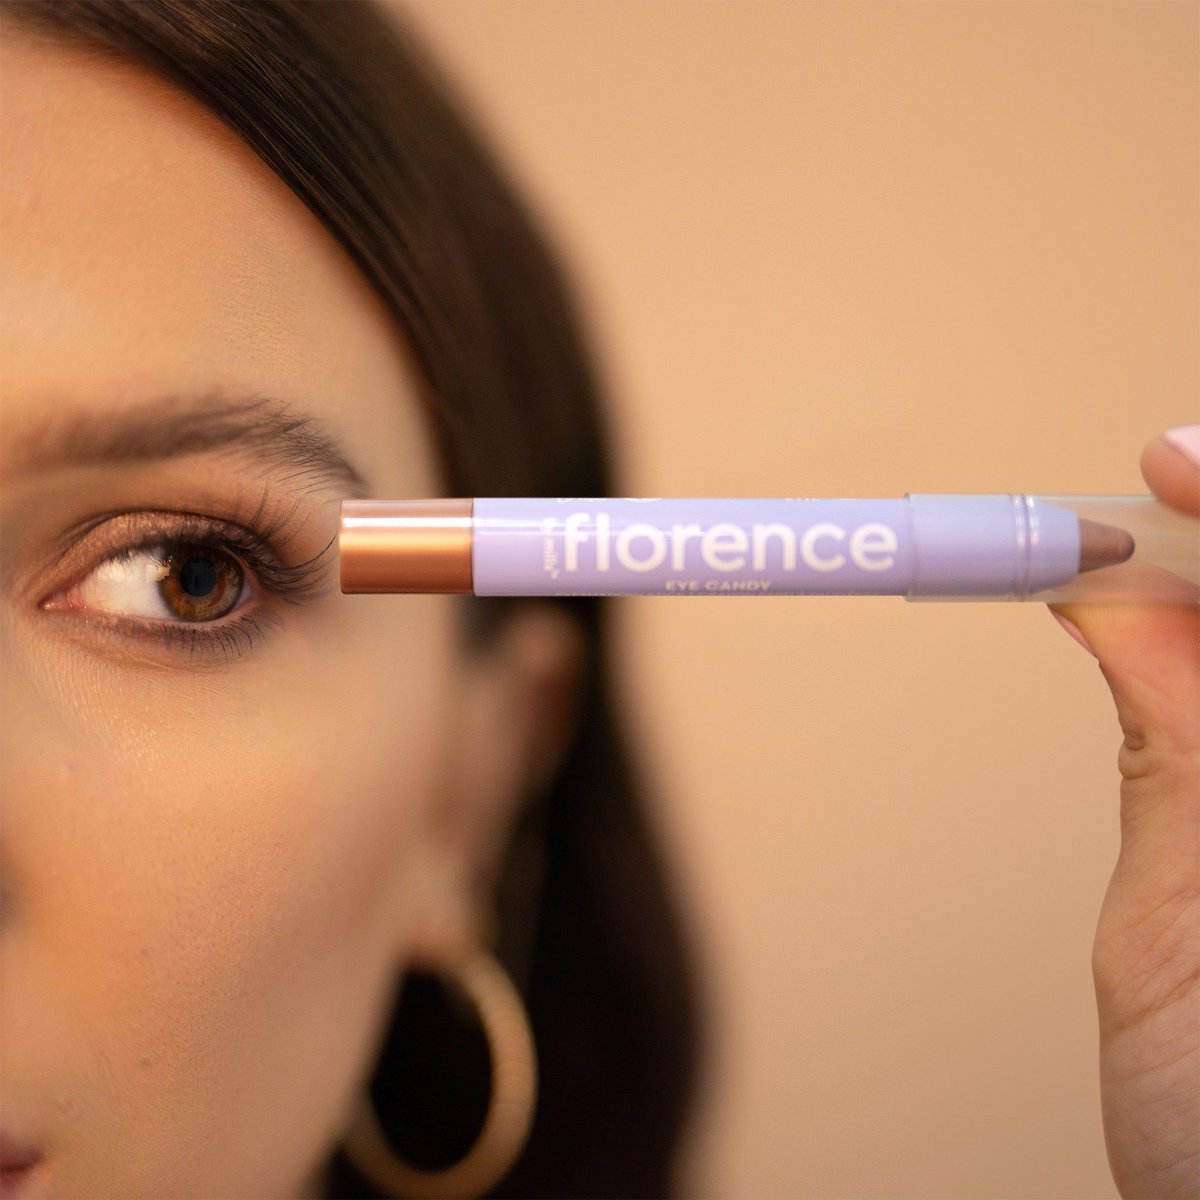 a toffee moment 🤎✨ why mills loves our eye candy eyeshadow sticks: 'i'm obsessed with how easy these eyeshadow sticks are to apply. they blend so easily and don’t budge for hours!' 

shop now at florencebymills.com #florencebymills